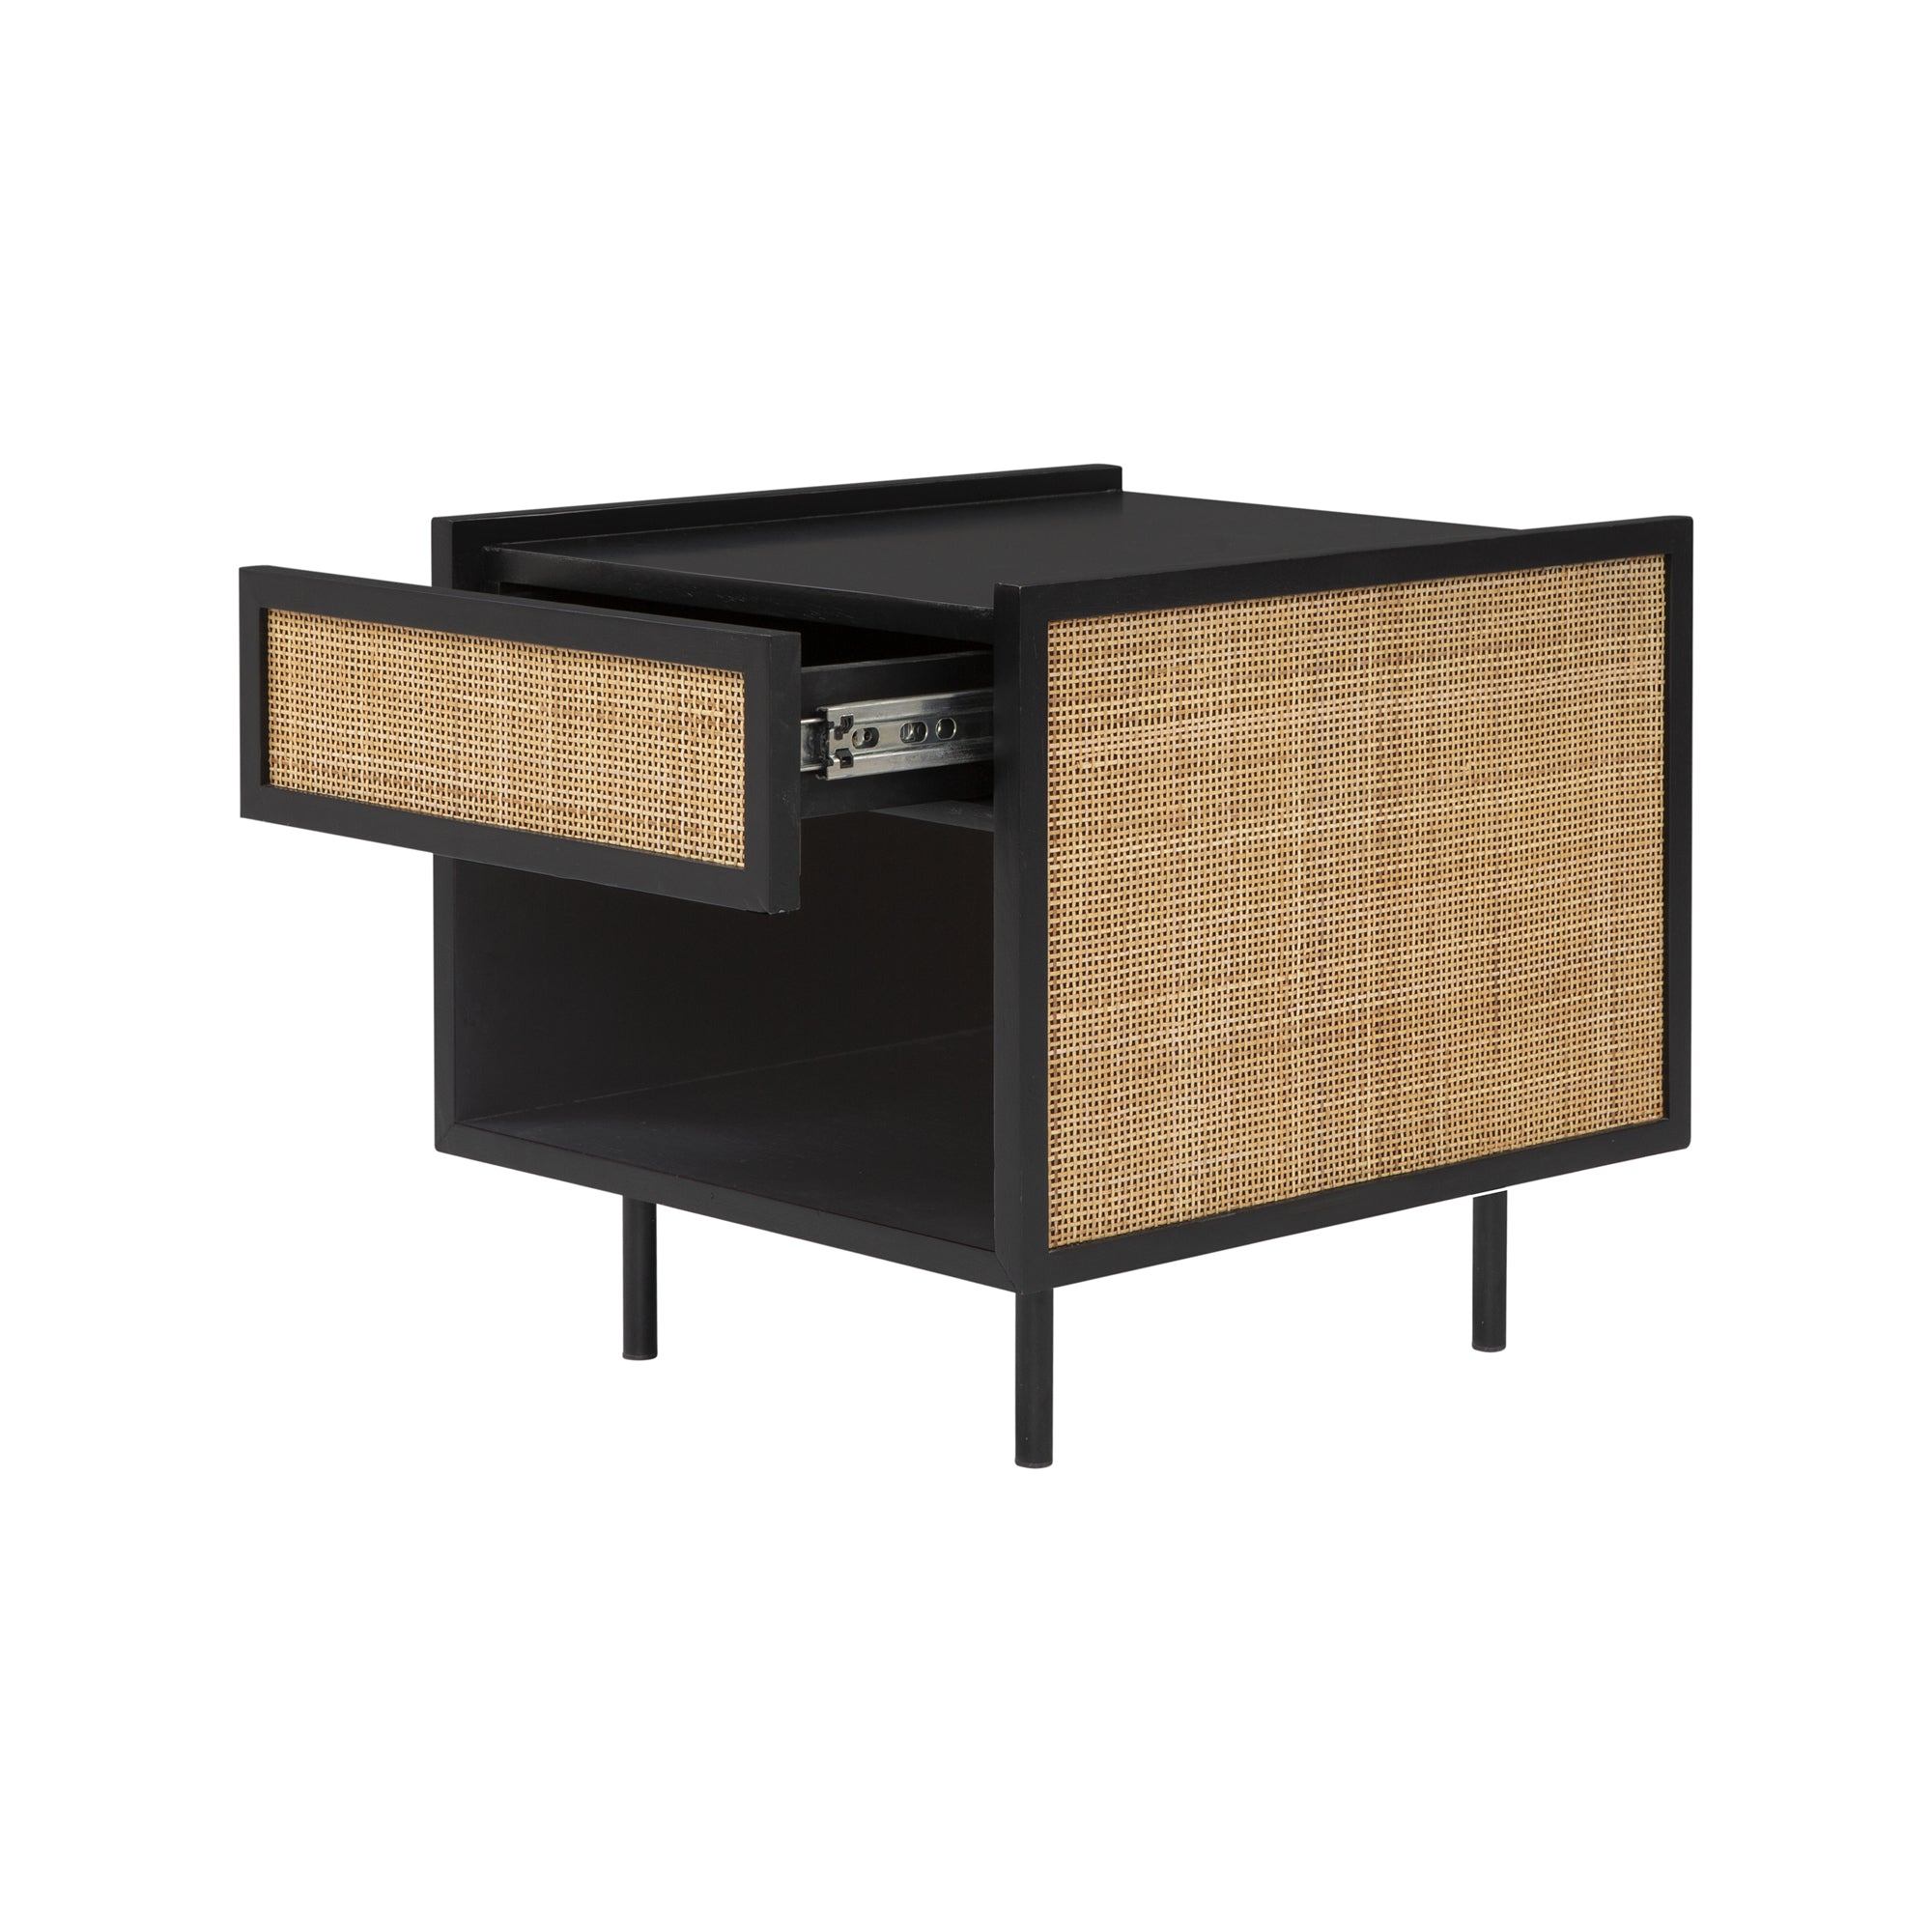 Cape Nightstand - Black with rattan